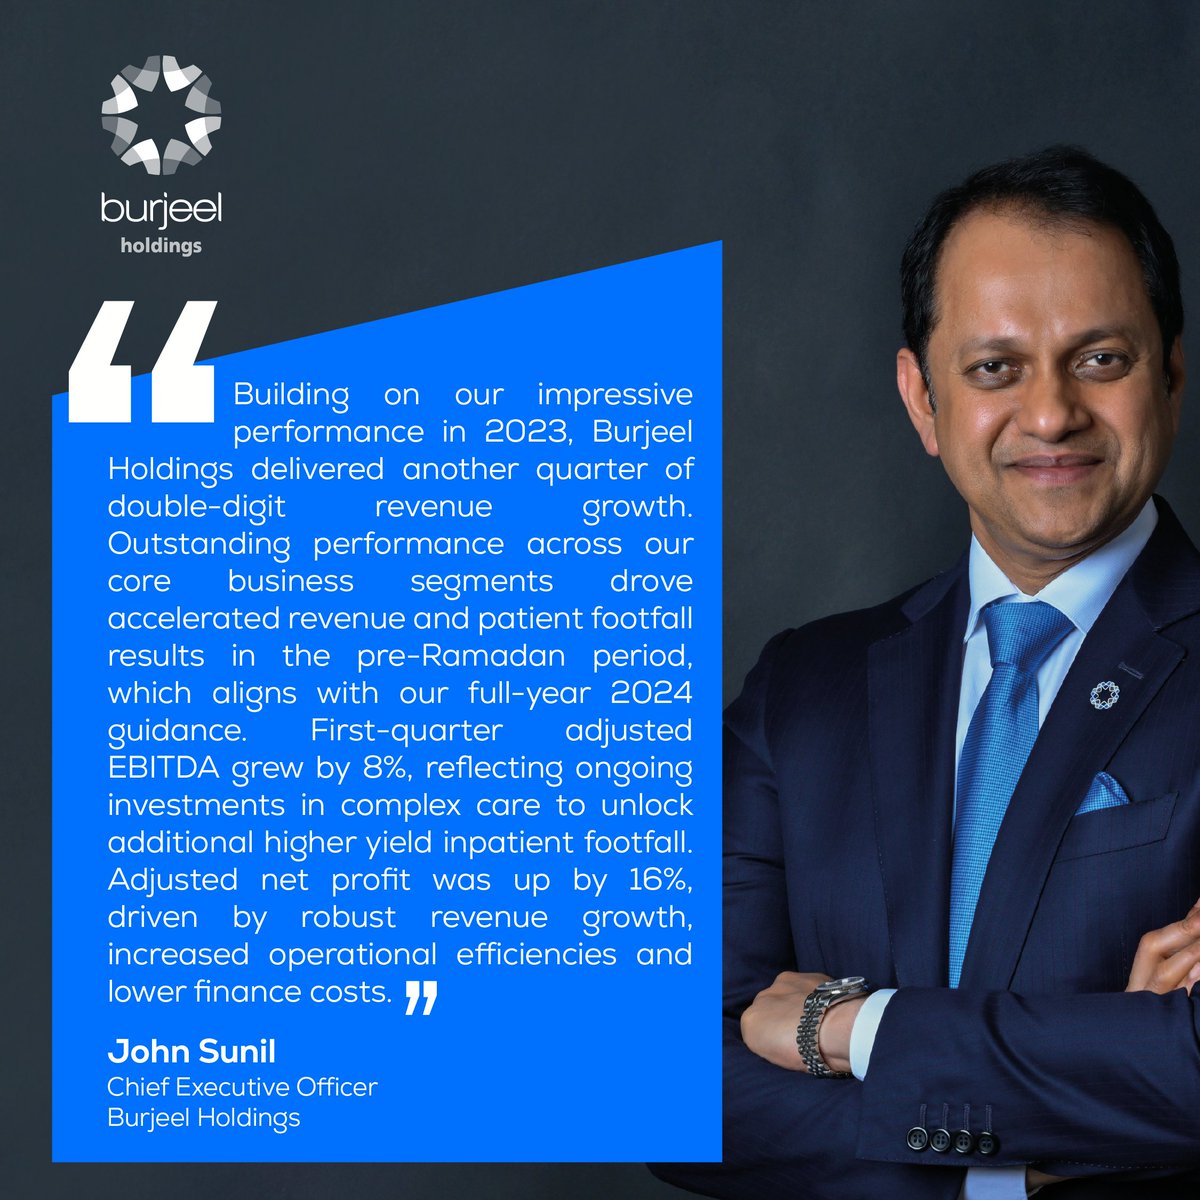 Mr. John Sunil, CEO of Burjeel Holdings, emphasizes the Group’s strong performance in the first quarter, especially in the pre-Ramadan period, bolstered by favorable macro tailwinds. The results reiterate our commitment to the 2024 guidance. #FinancialResults #BurjeelHoldings #Q1